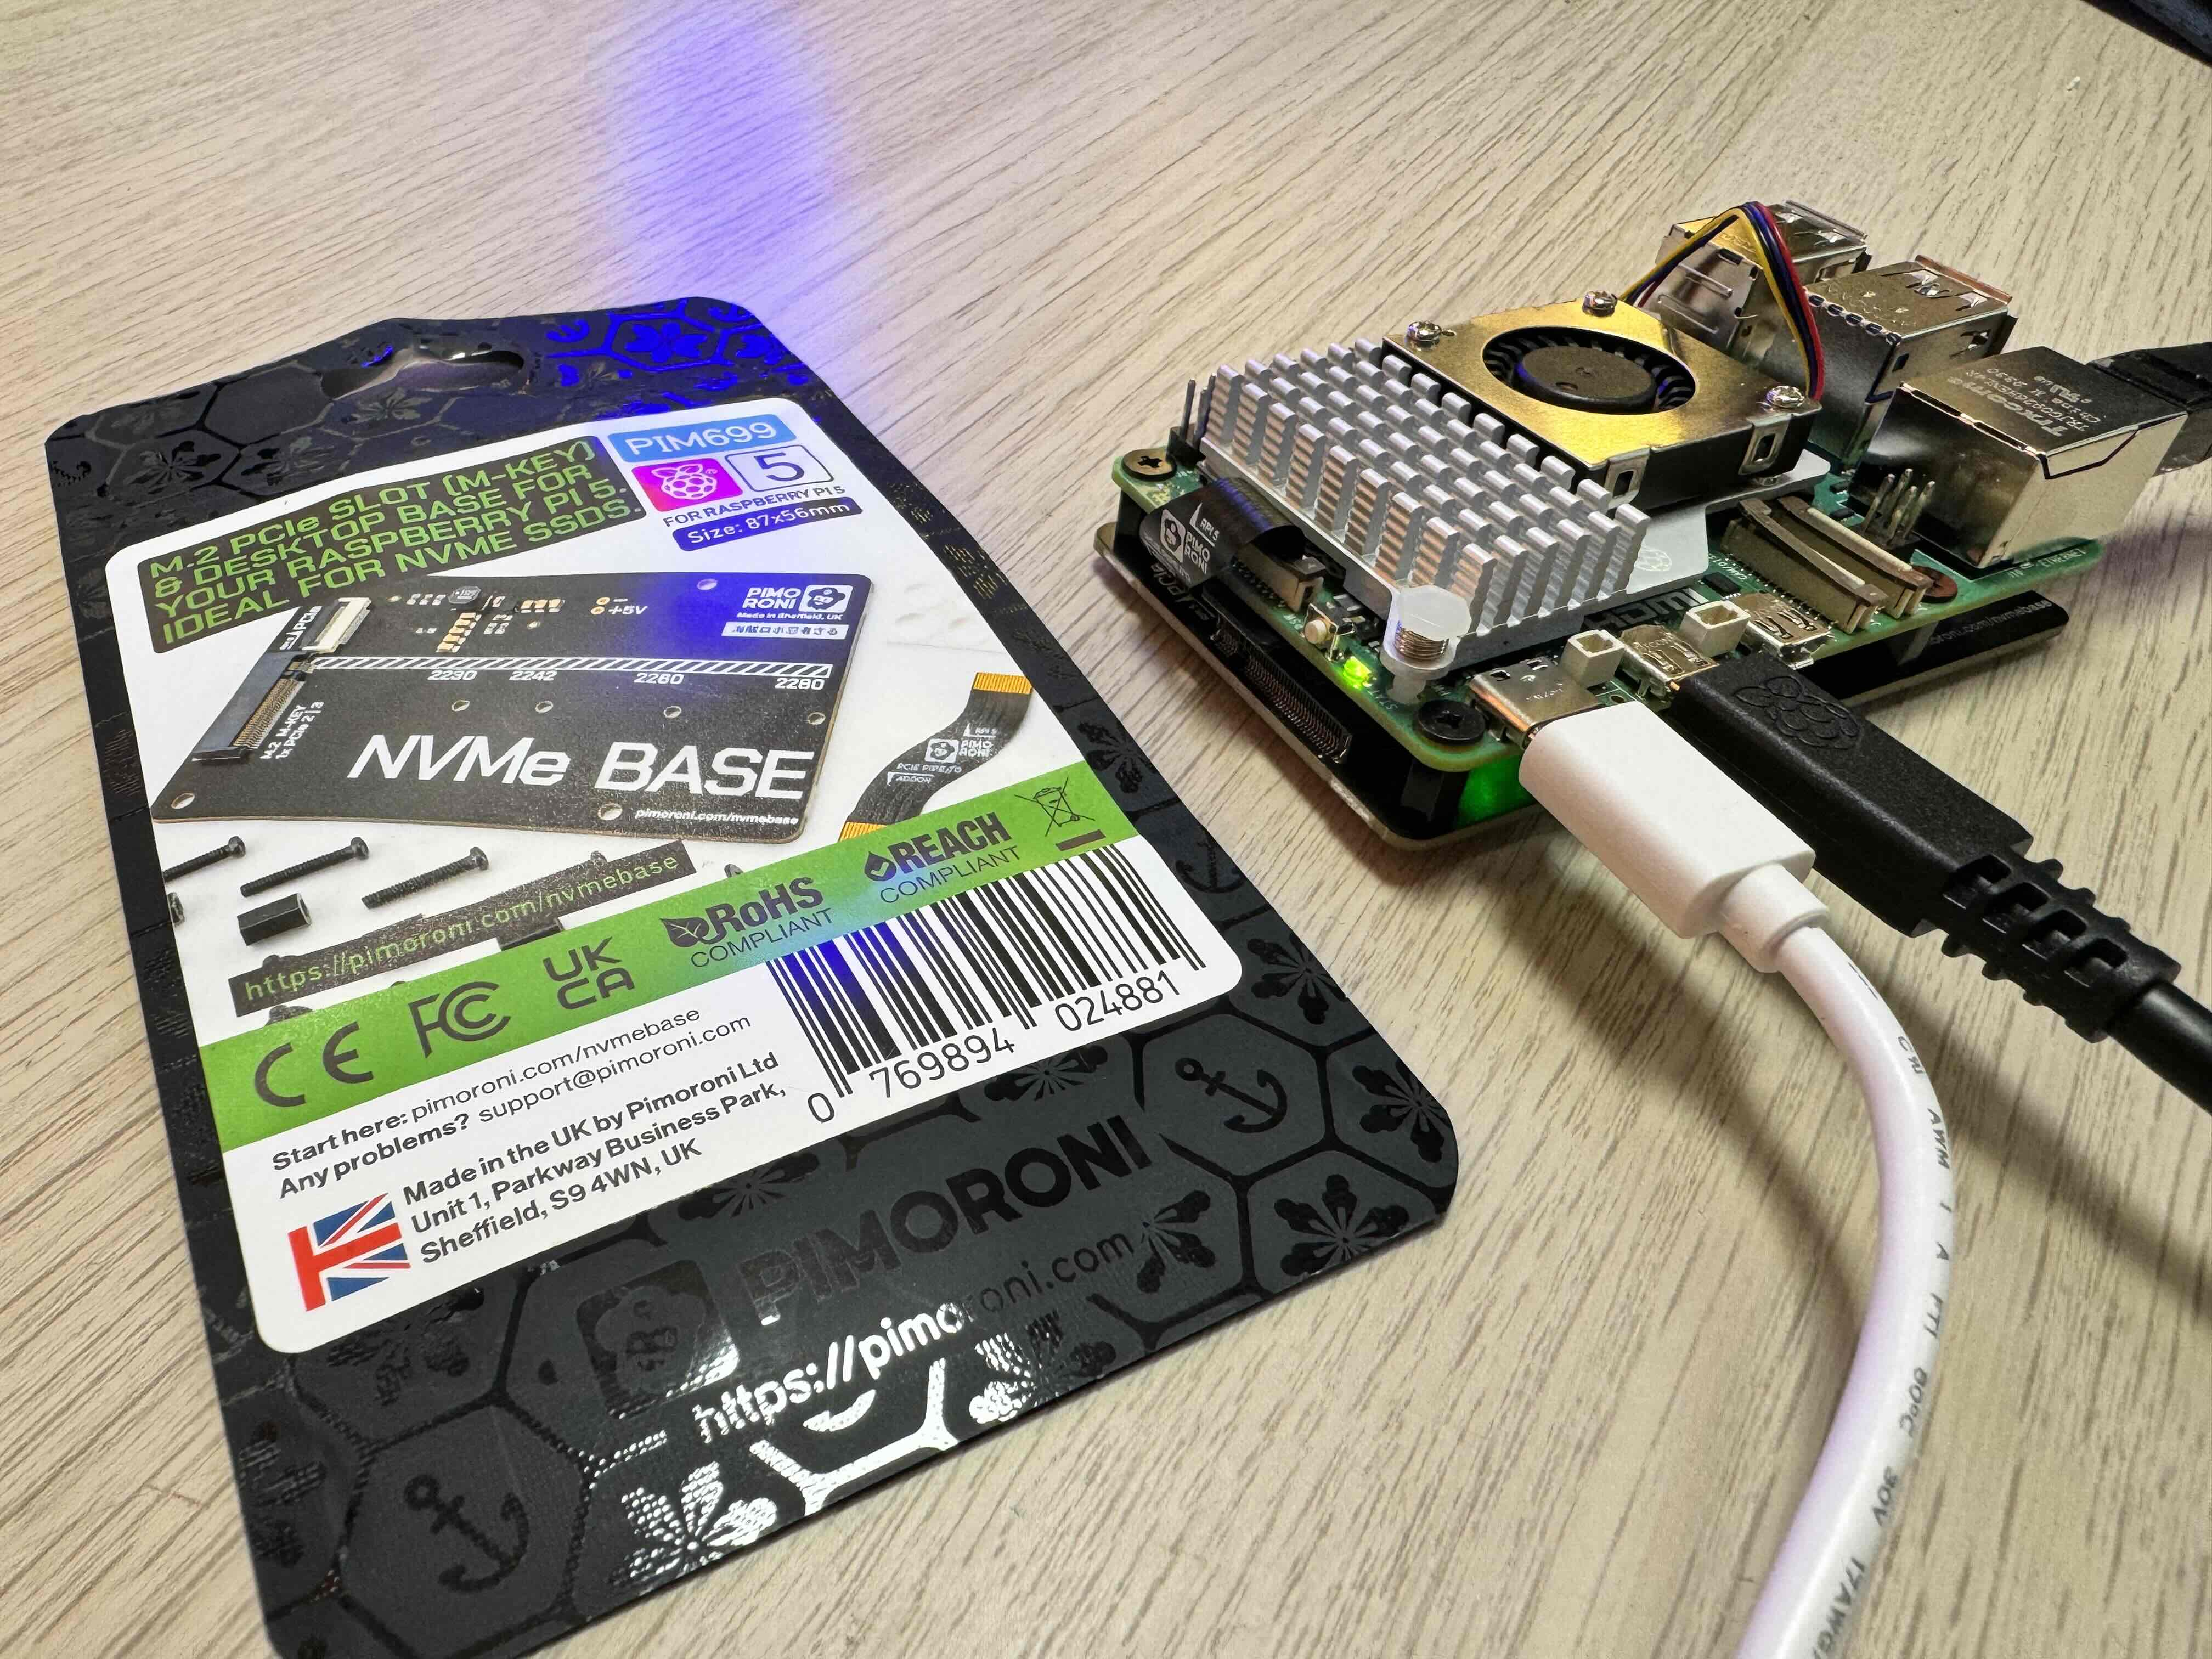 Picture of the NVMe Base and packaging